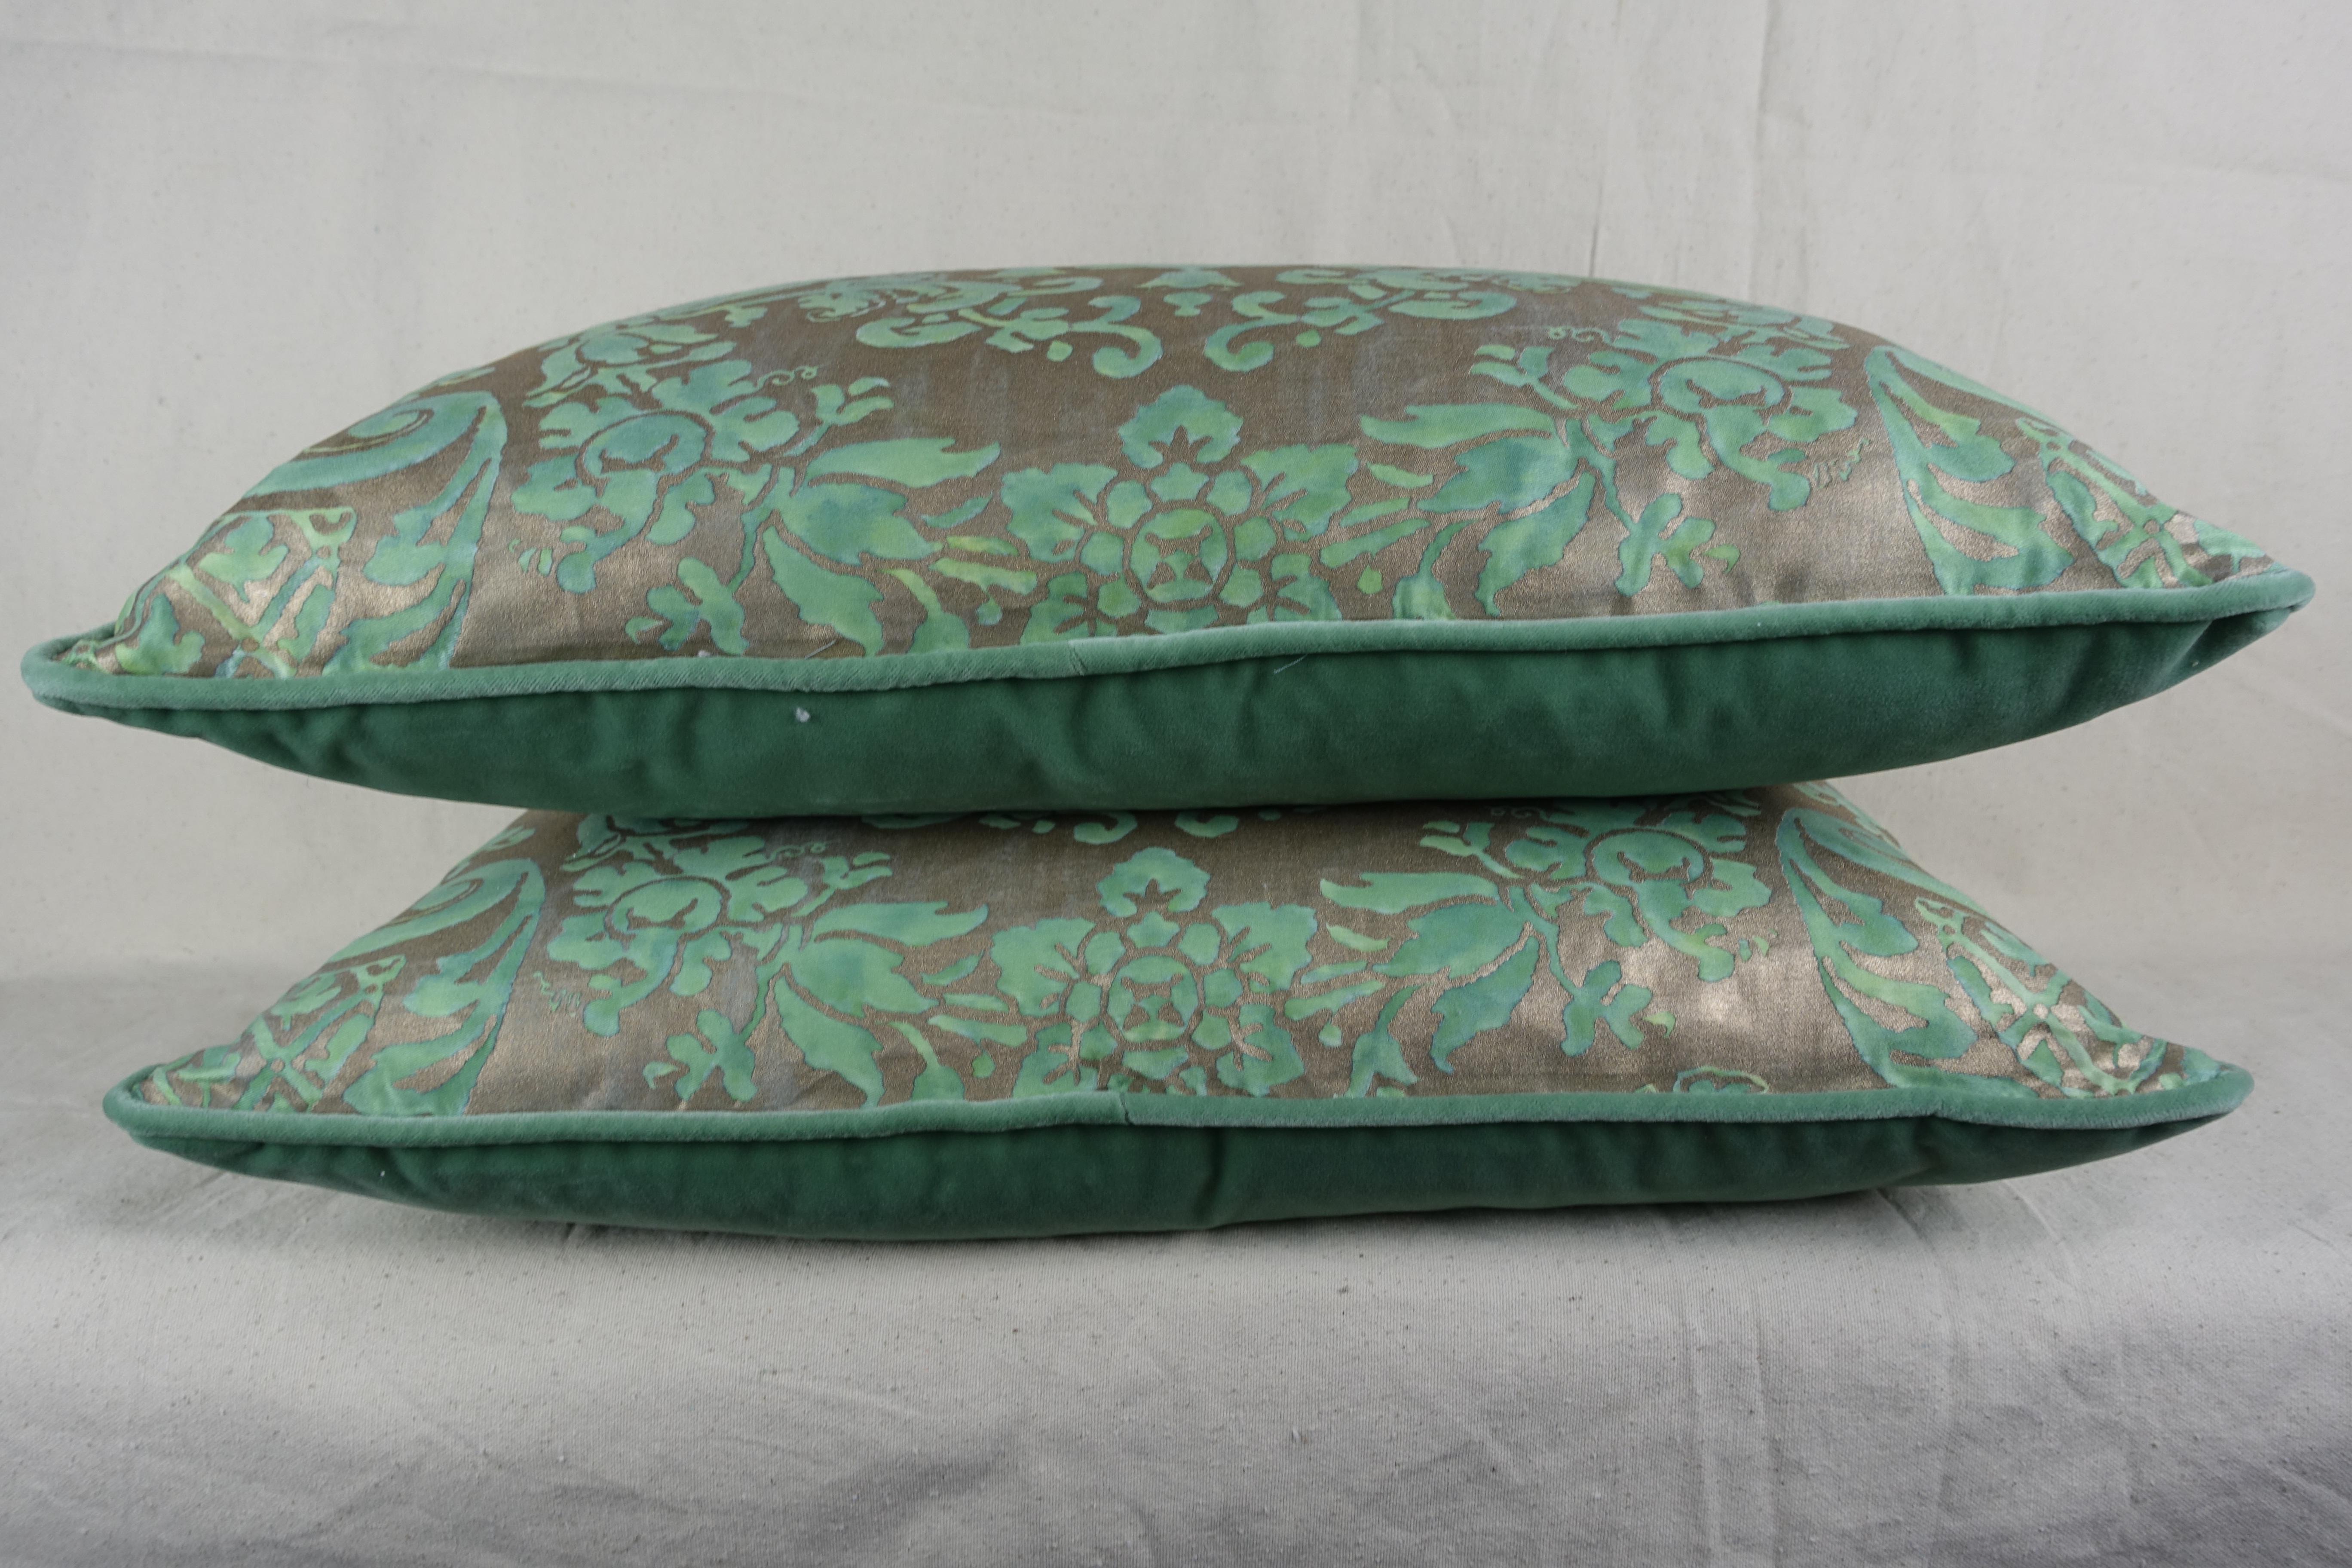 fortuny pillows for sale